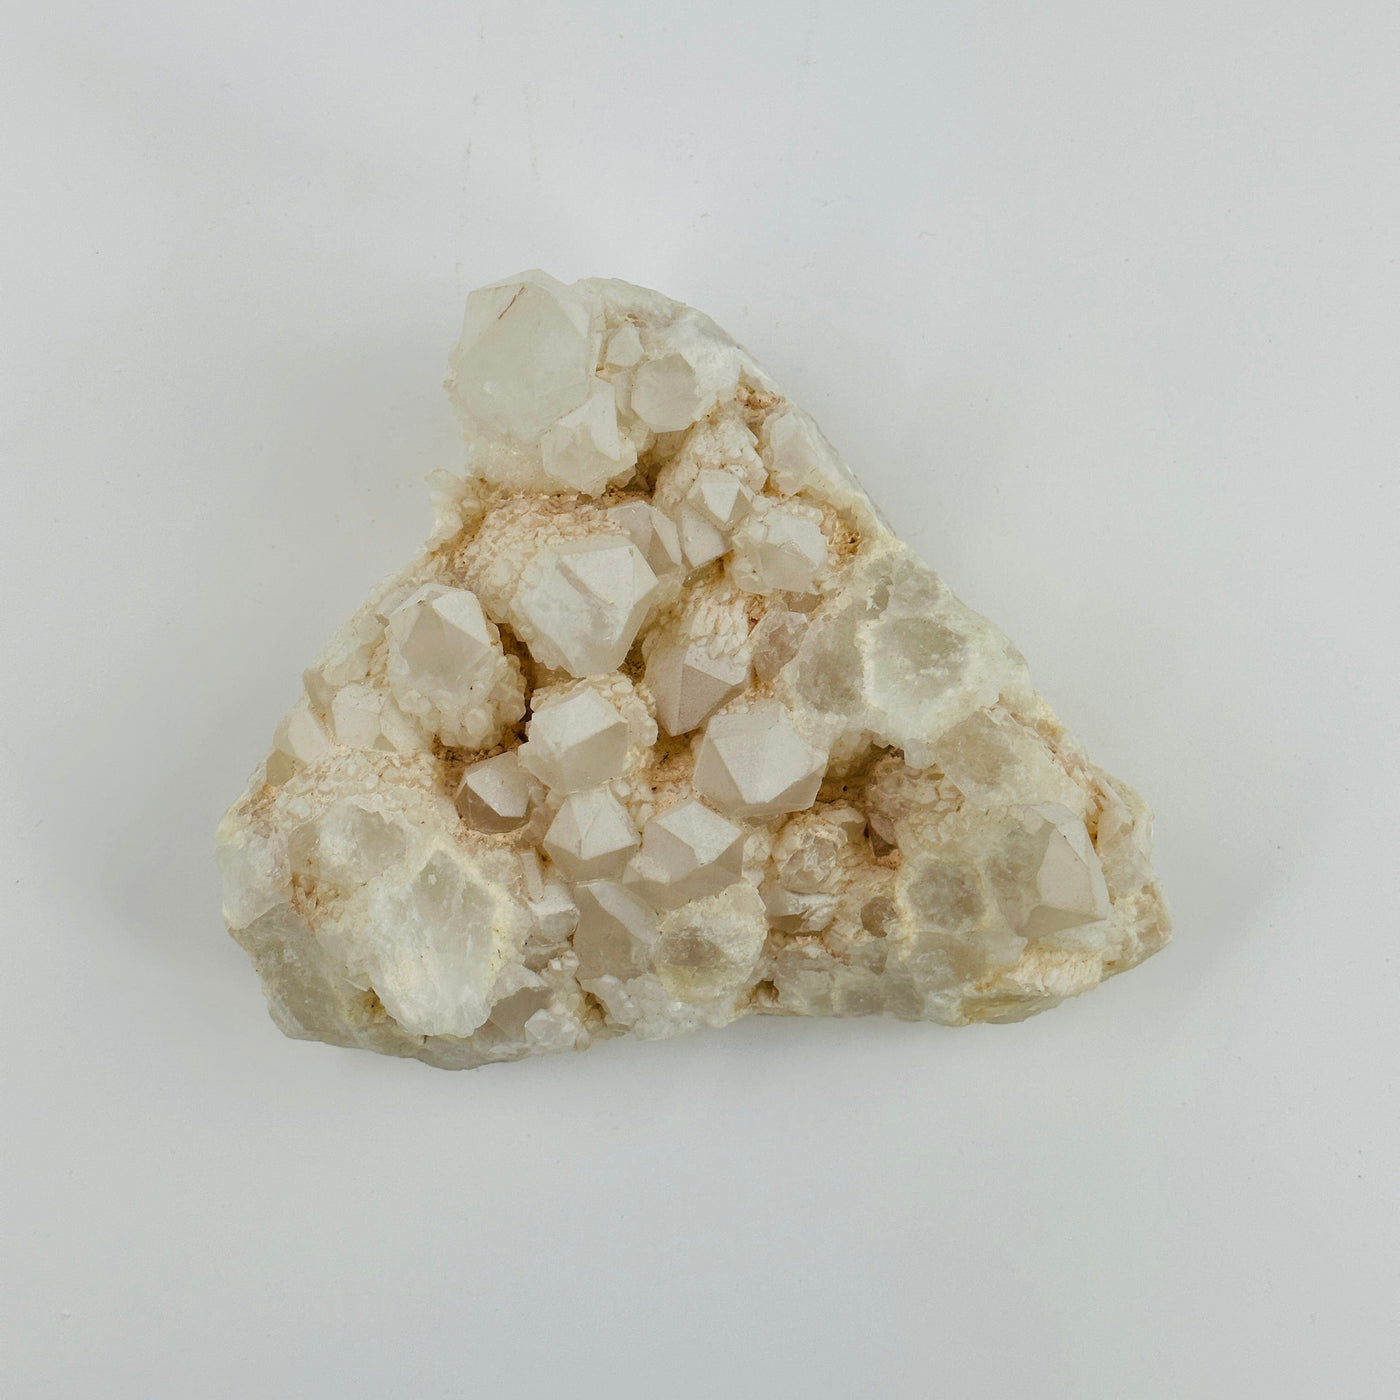 Top view of calcite cluster on white background